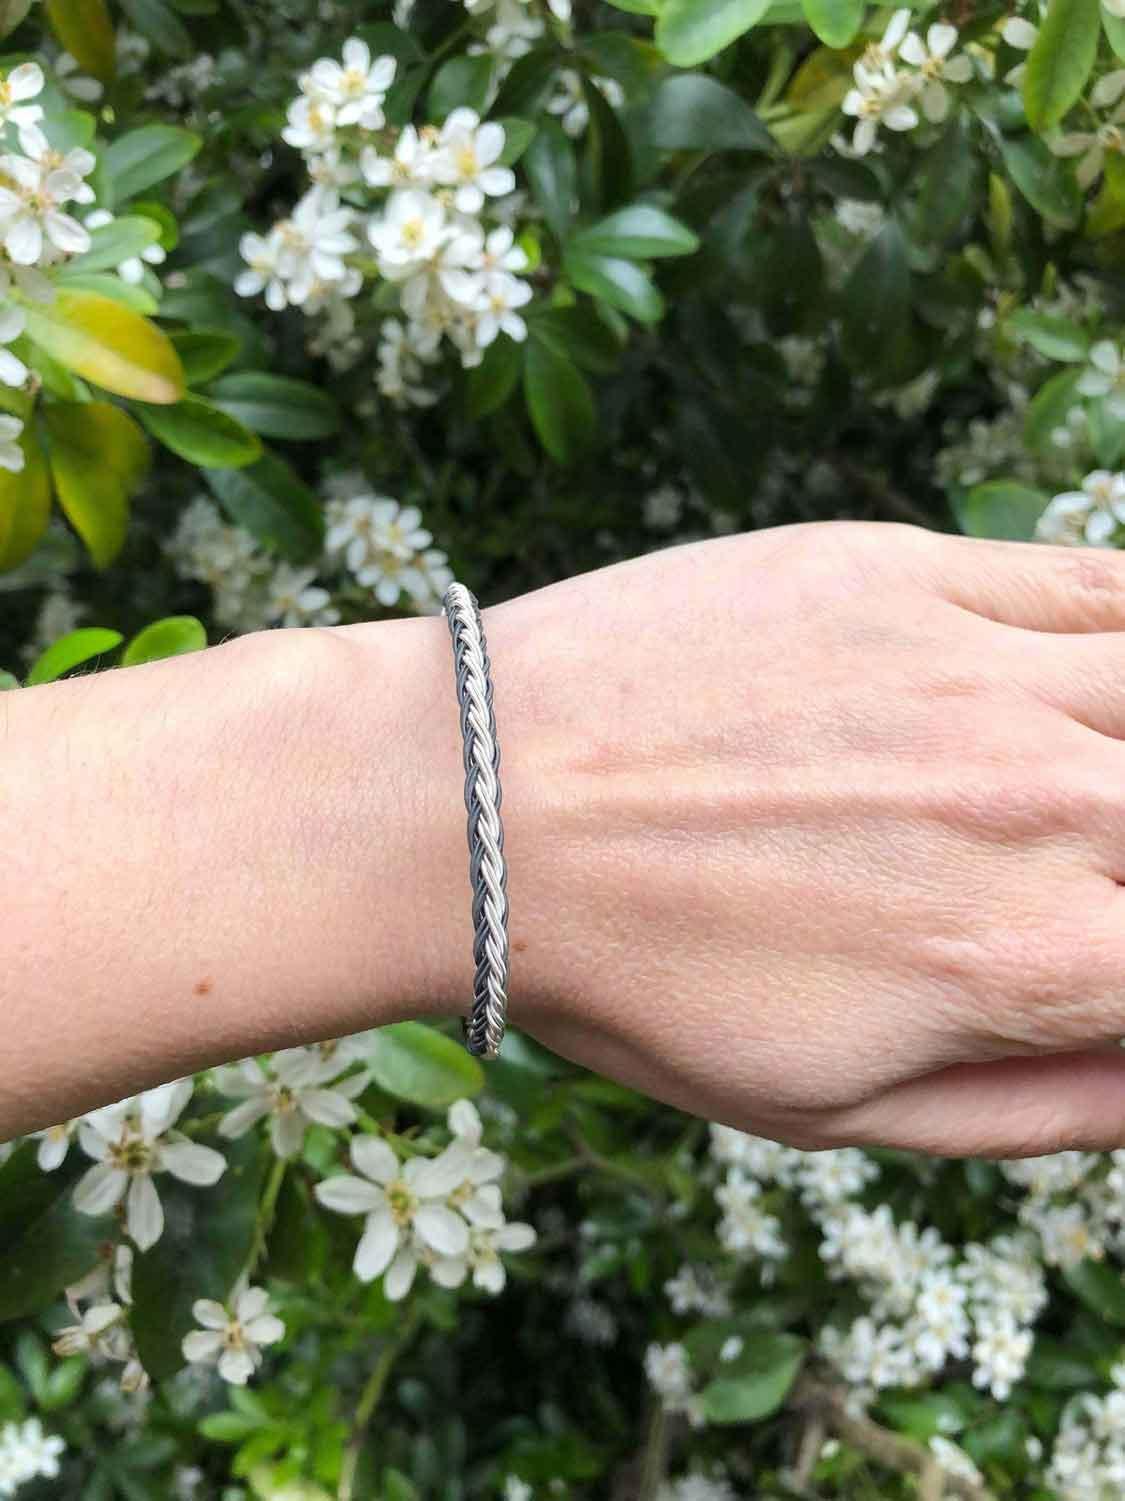 Handcrafted WOVEN BRACELET, Fishtail Braid Women Bracelet, Sterling Silver Bracelet, Woman Bracelet, Braided Bracelet, Dainty Jewelry available at Moyoni Design